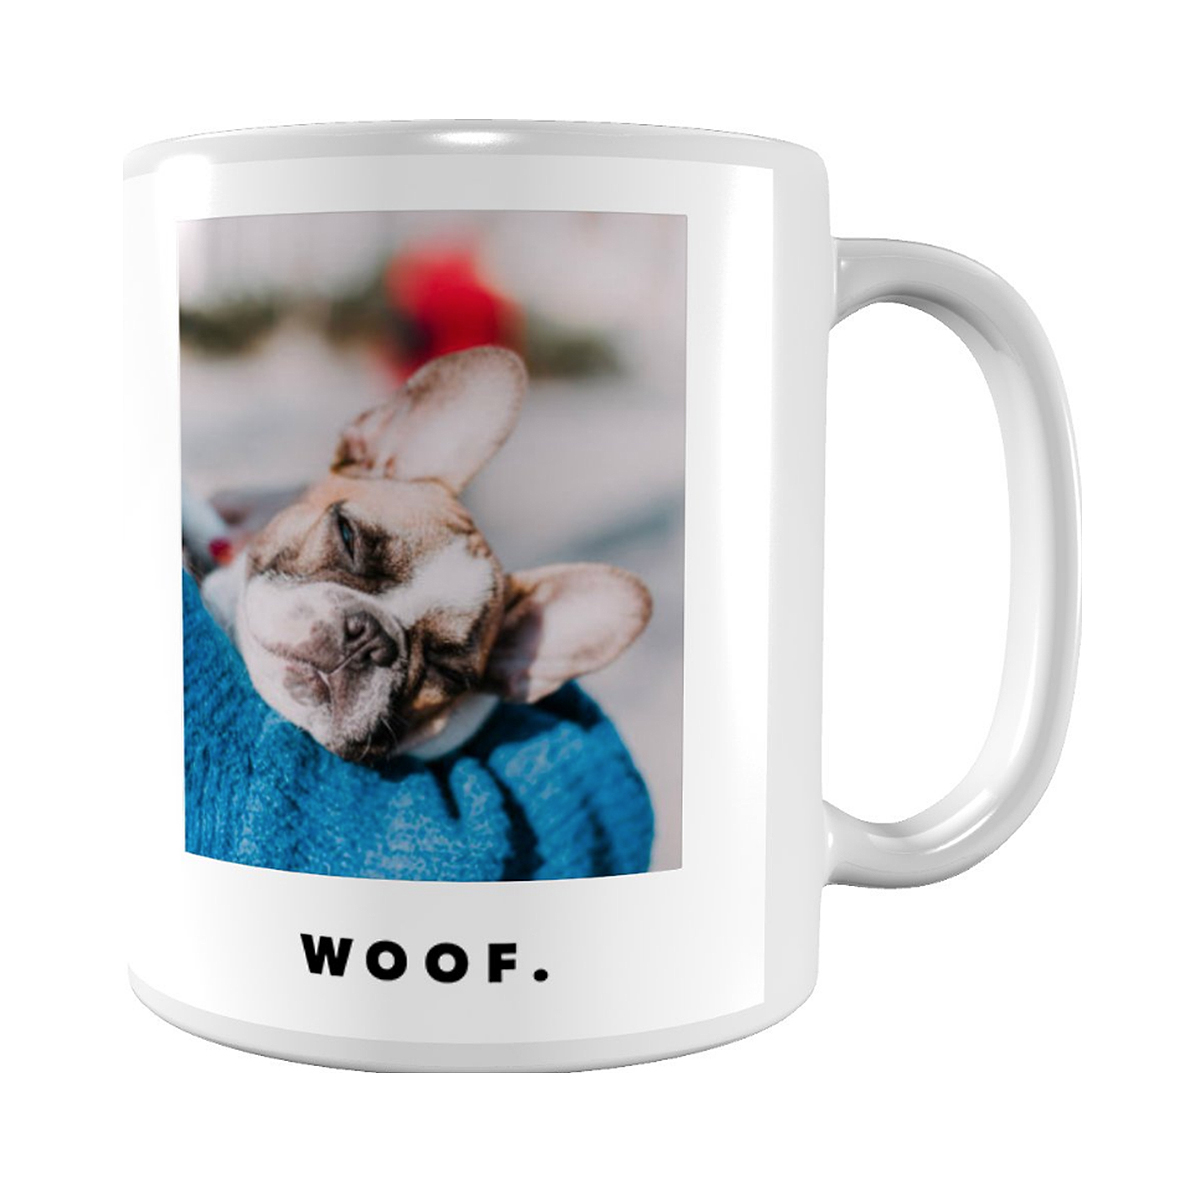 43 Gifts for Dog Lovers That Are Just Paw-fect